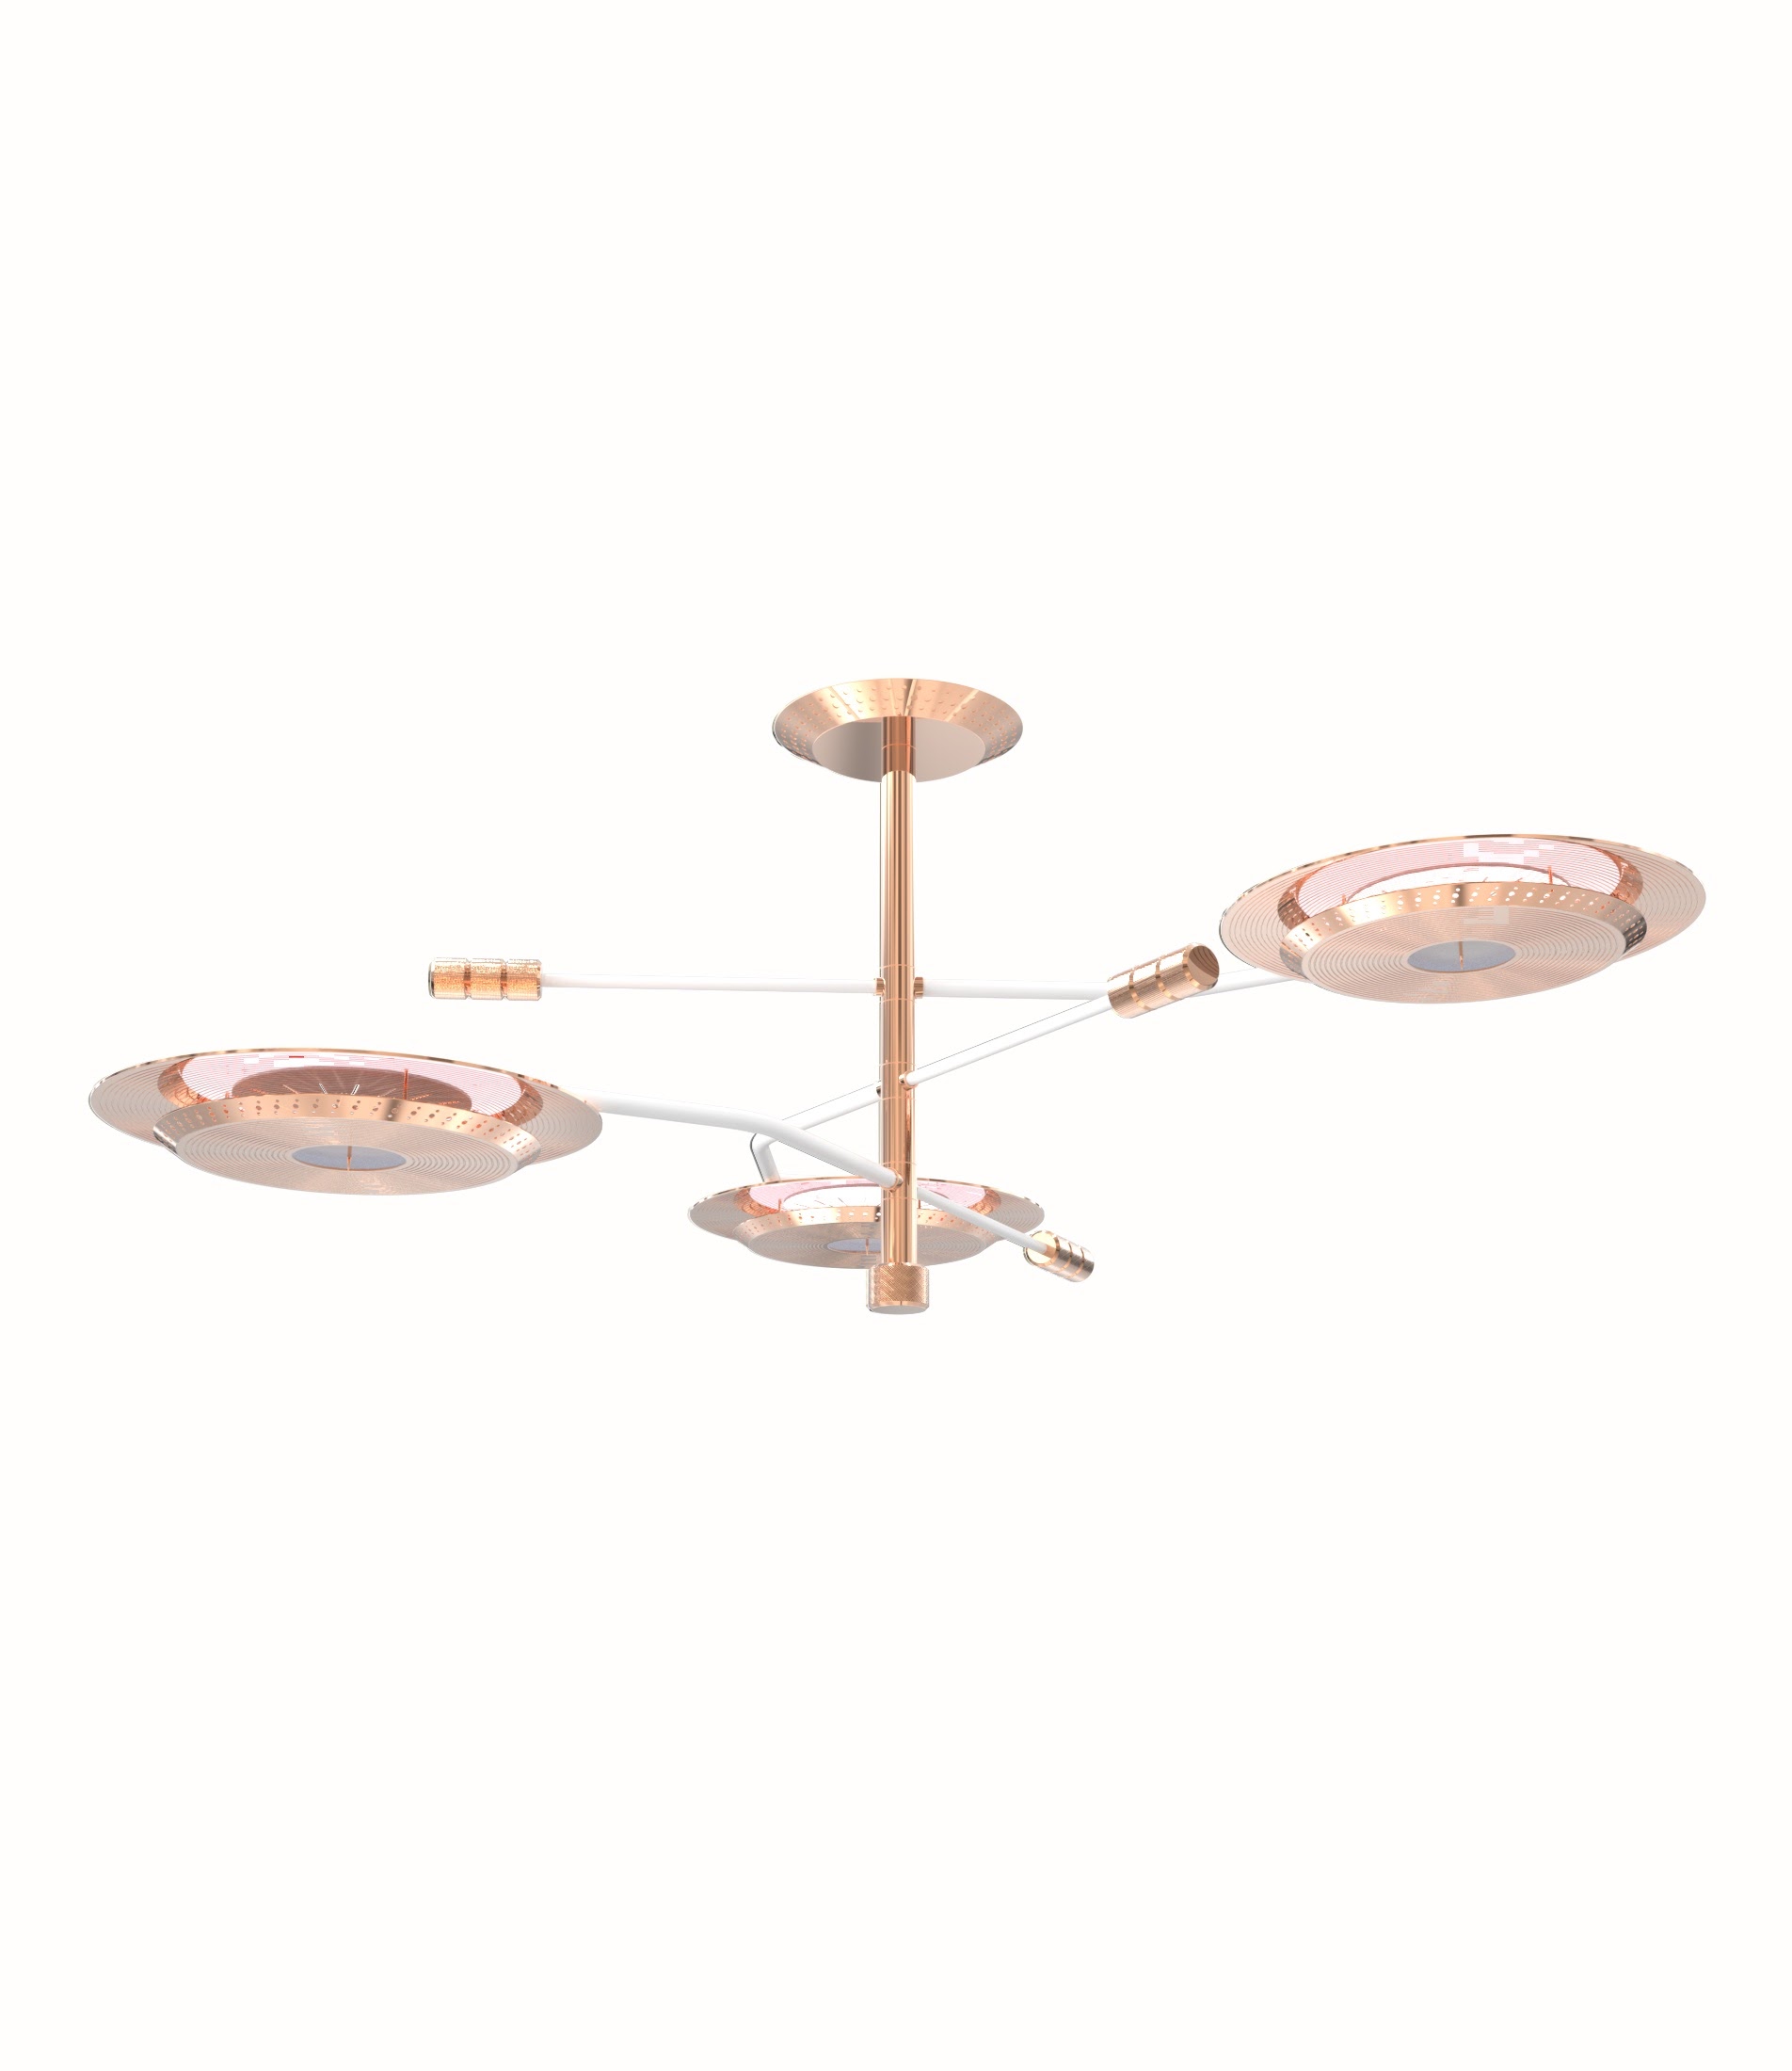 10 Copper Contemporary Lighting Ideas for Your Summer Project